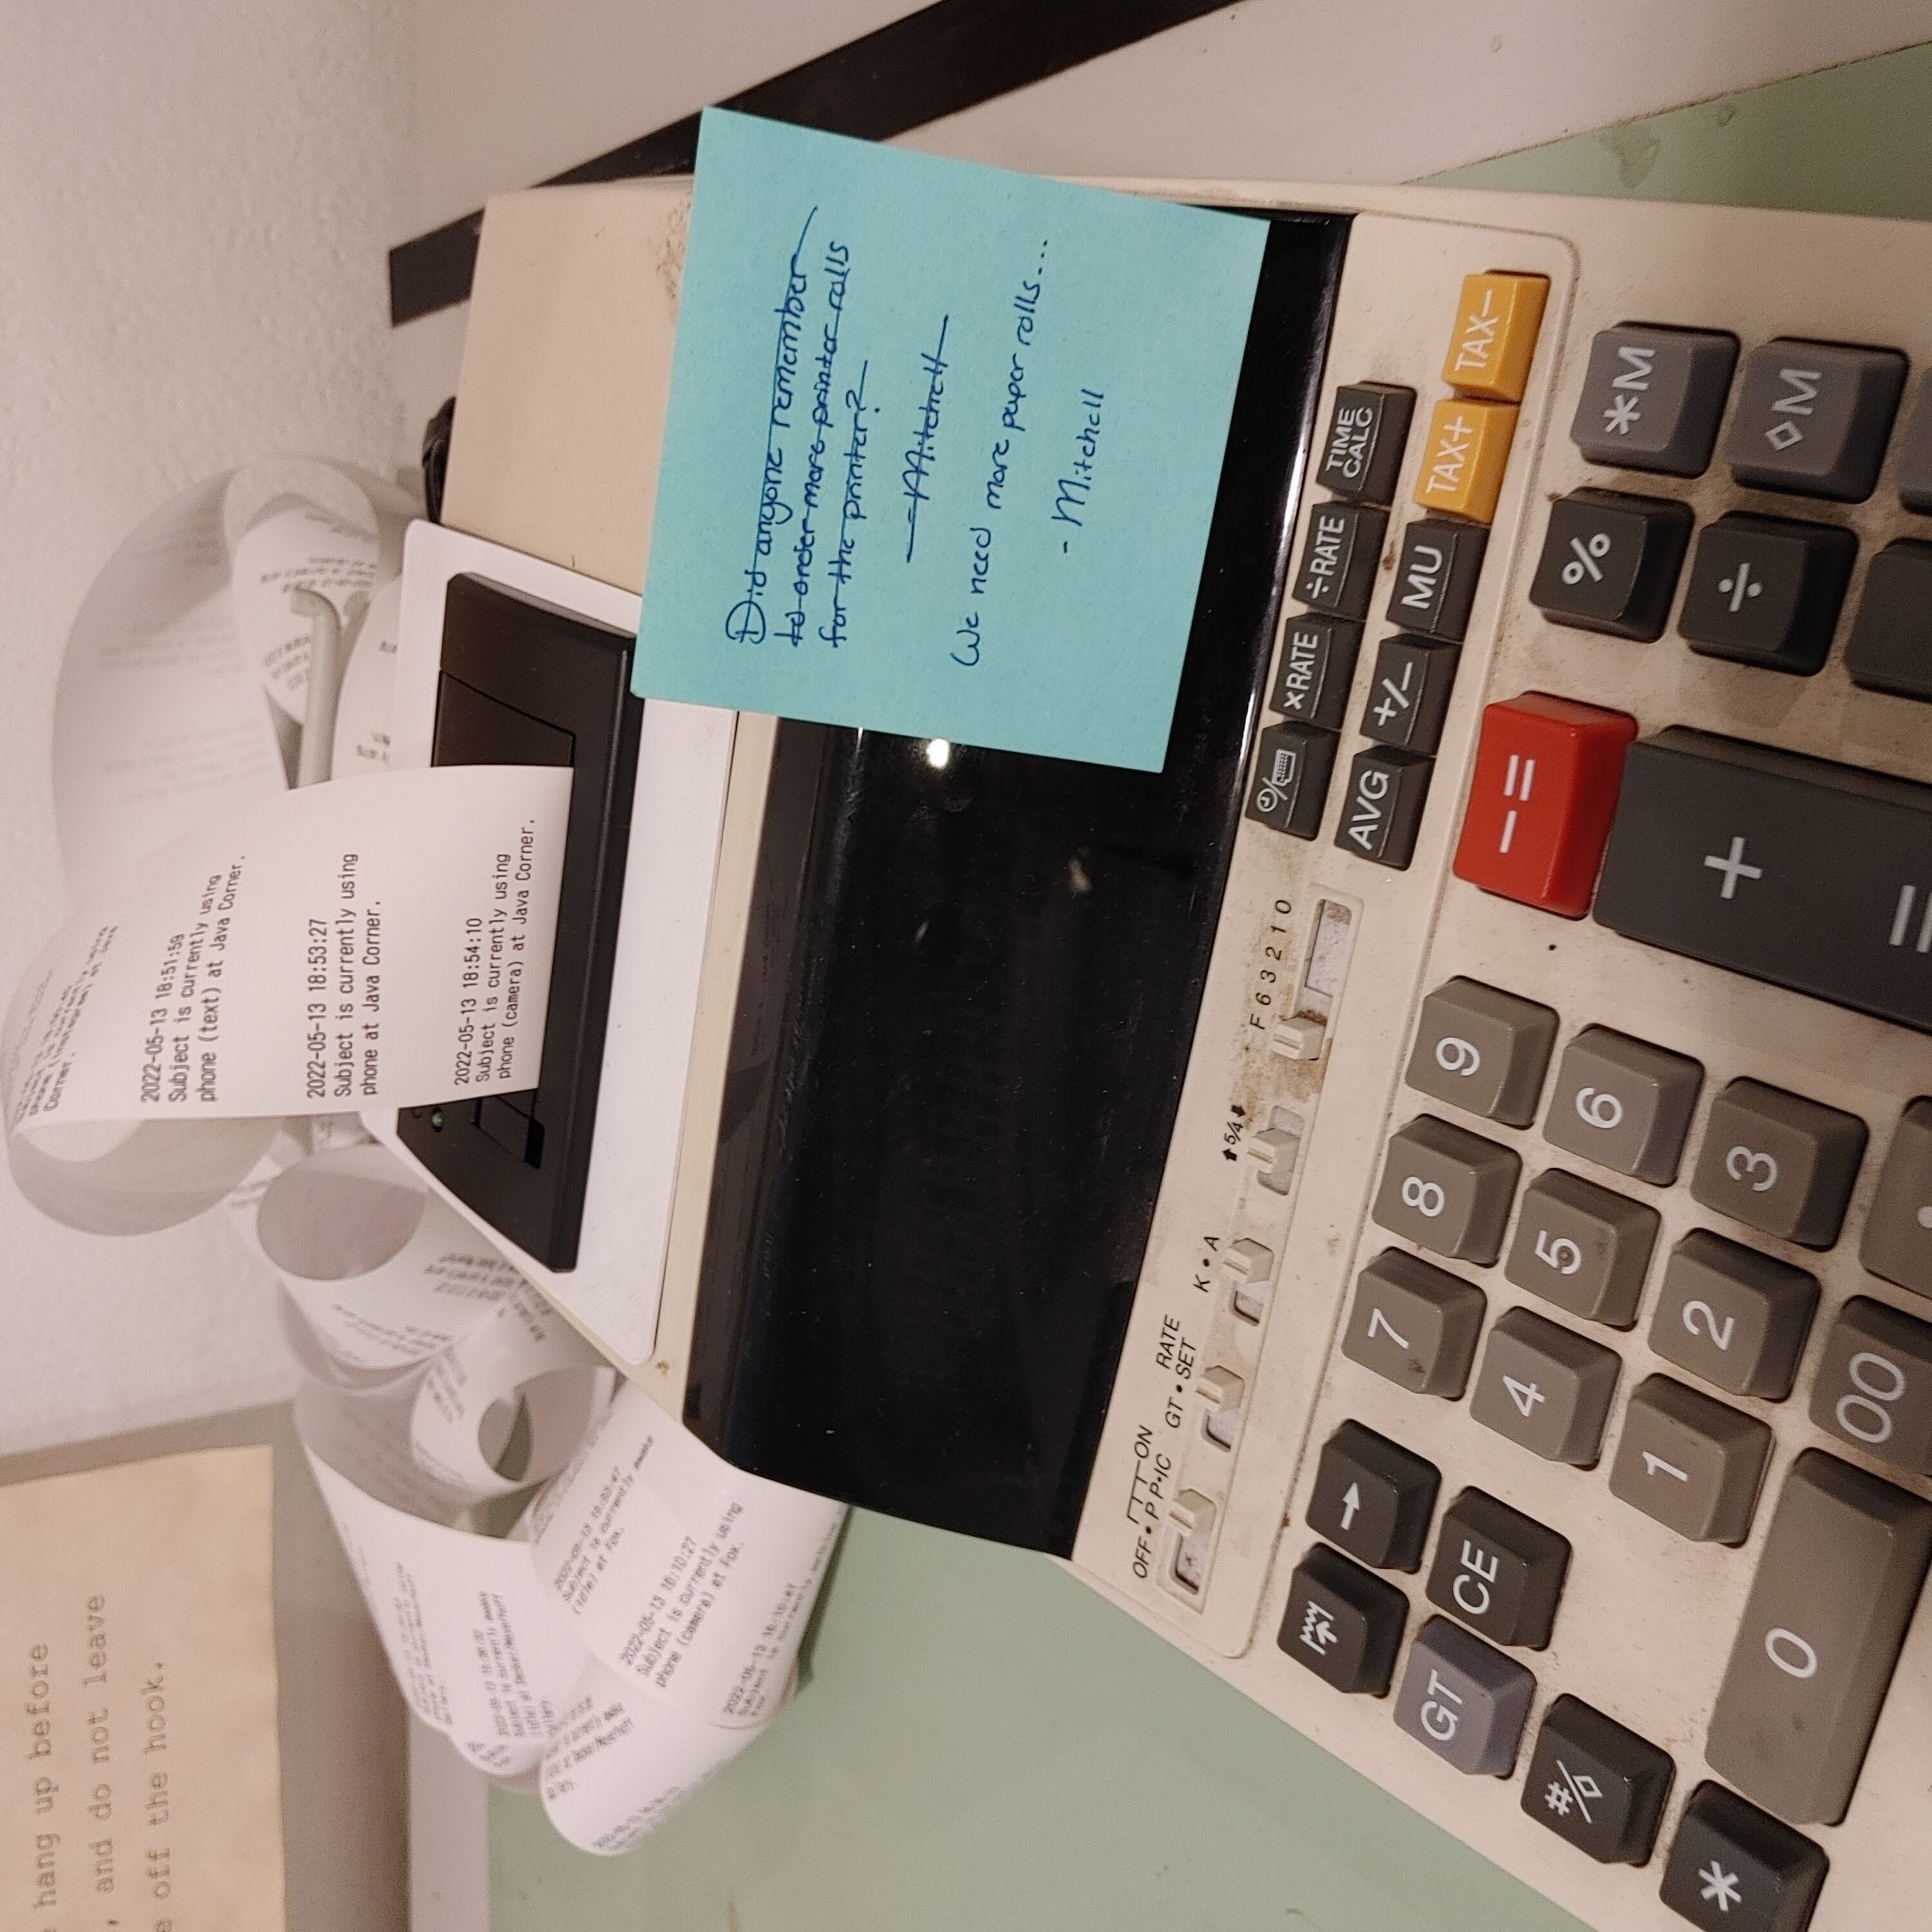 Photo of the accounting calculator close up. Peter's logged activities are legible on the spooled out paper. A blue post-it note asking for more paper is stuck to the front of the calculator.